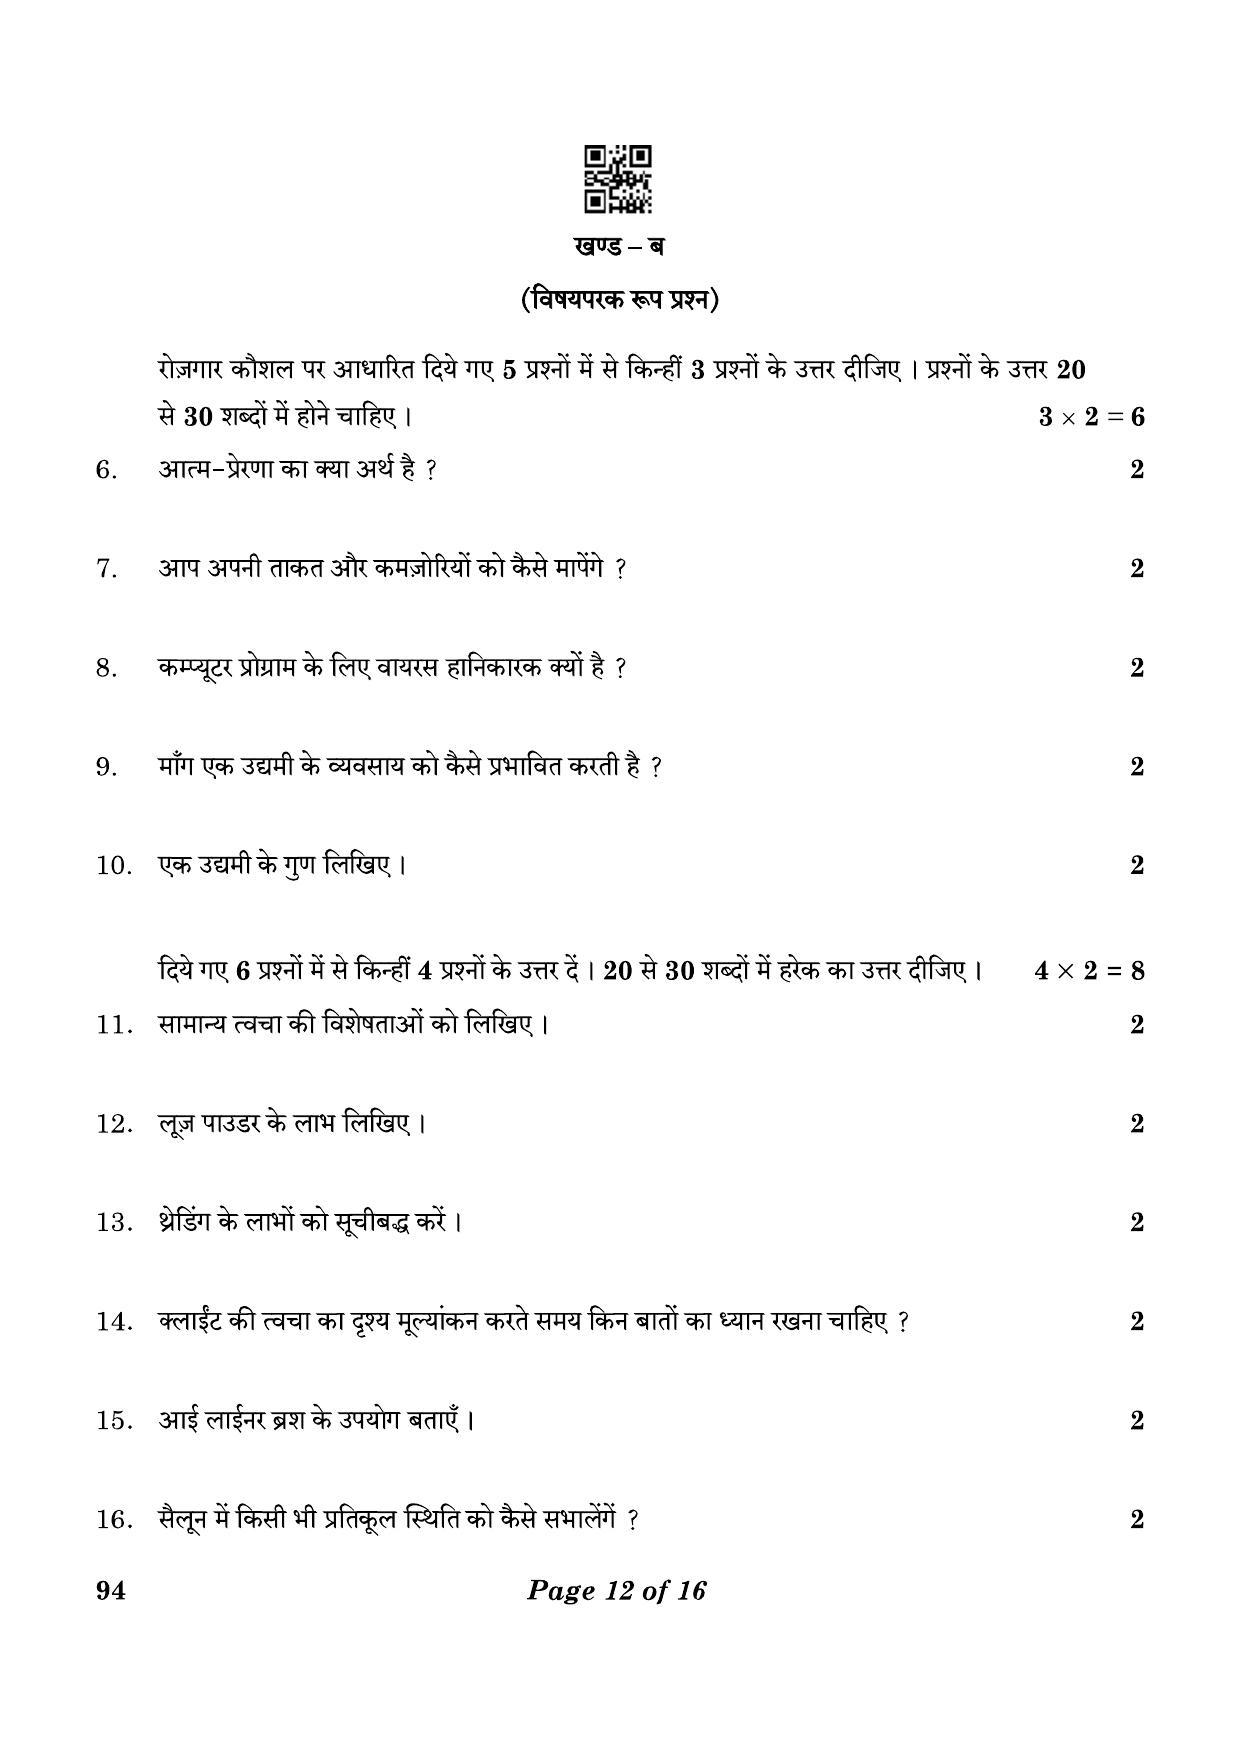 CBSE Class 10 94 Beauty And Wellness 2023 Question Paper - Page 12